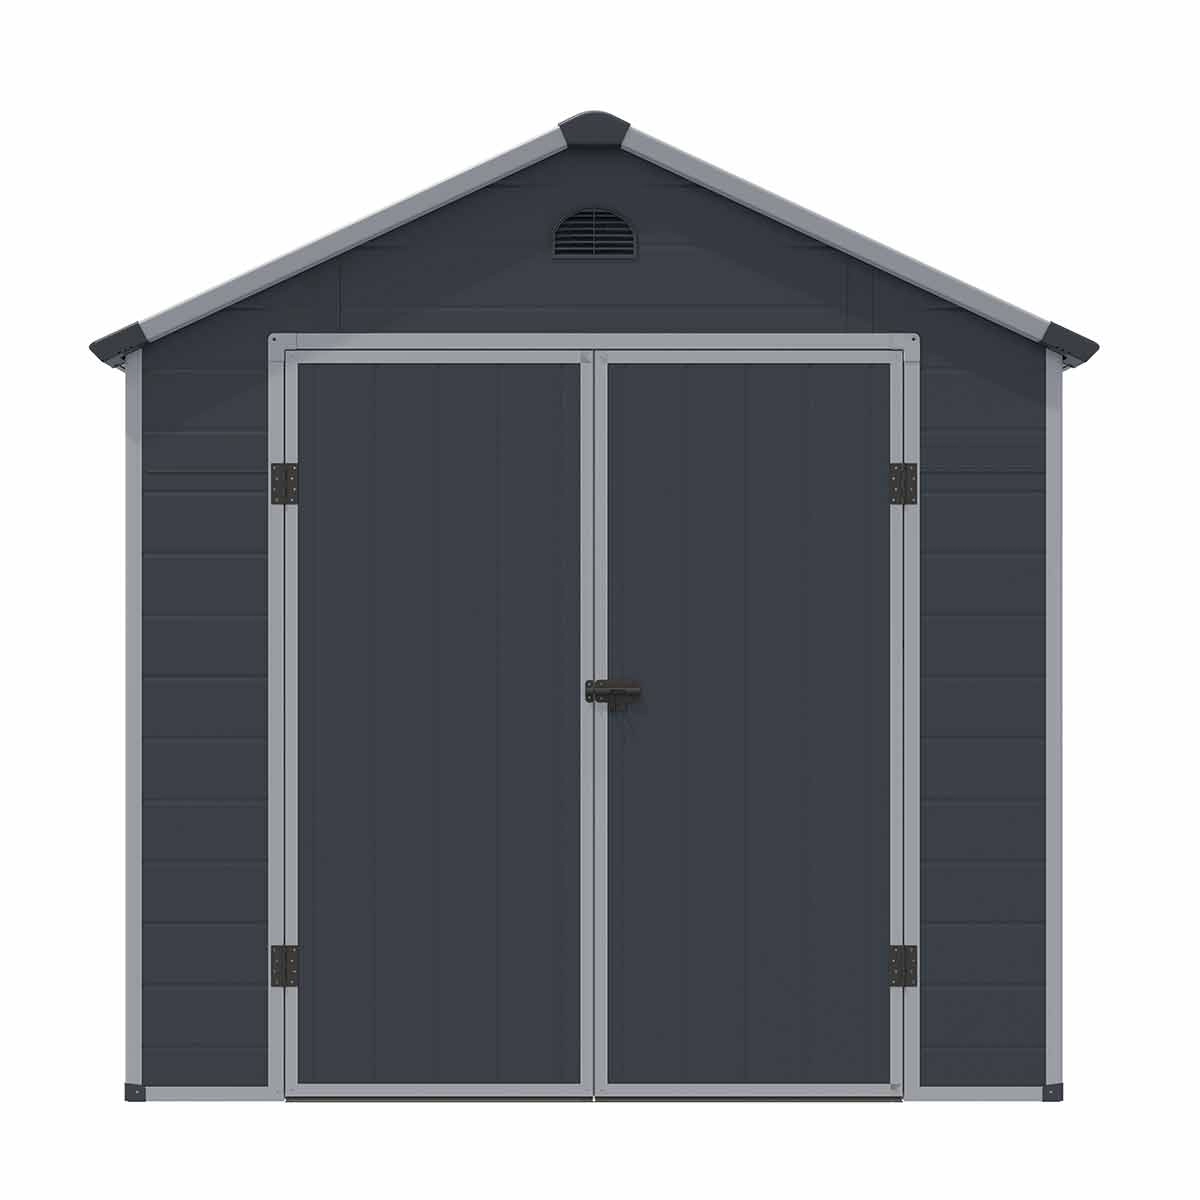 Rowlinson Airevale 8 x 6ft Plastic Shed Light Grey Polypropylene - wilko